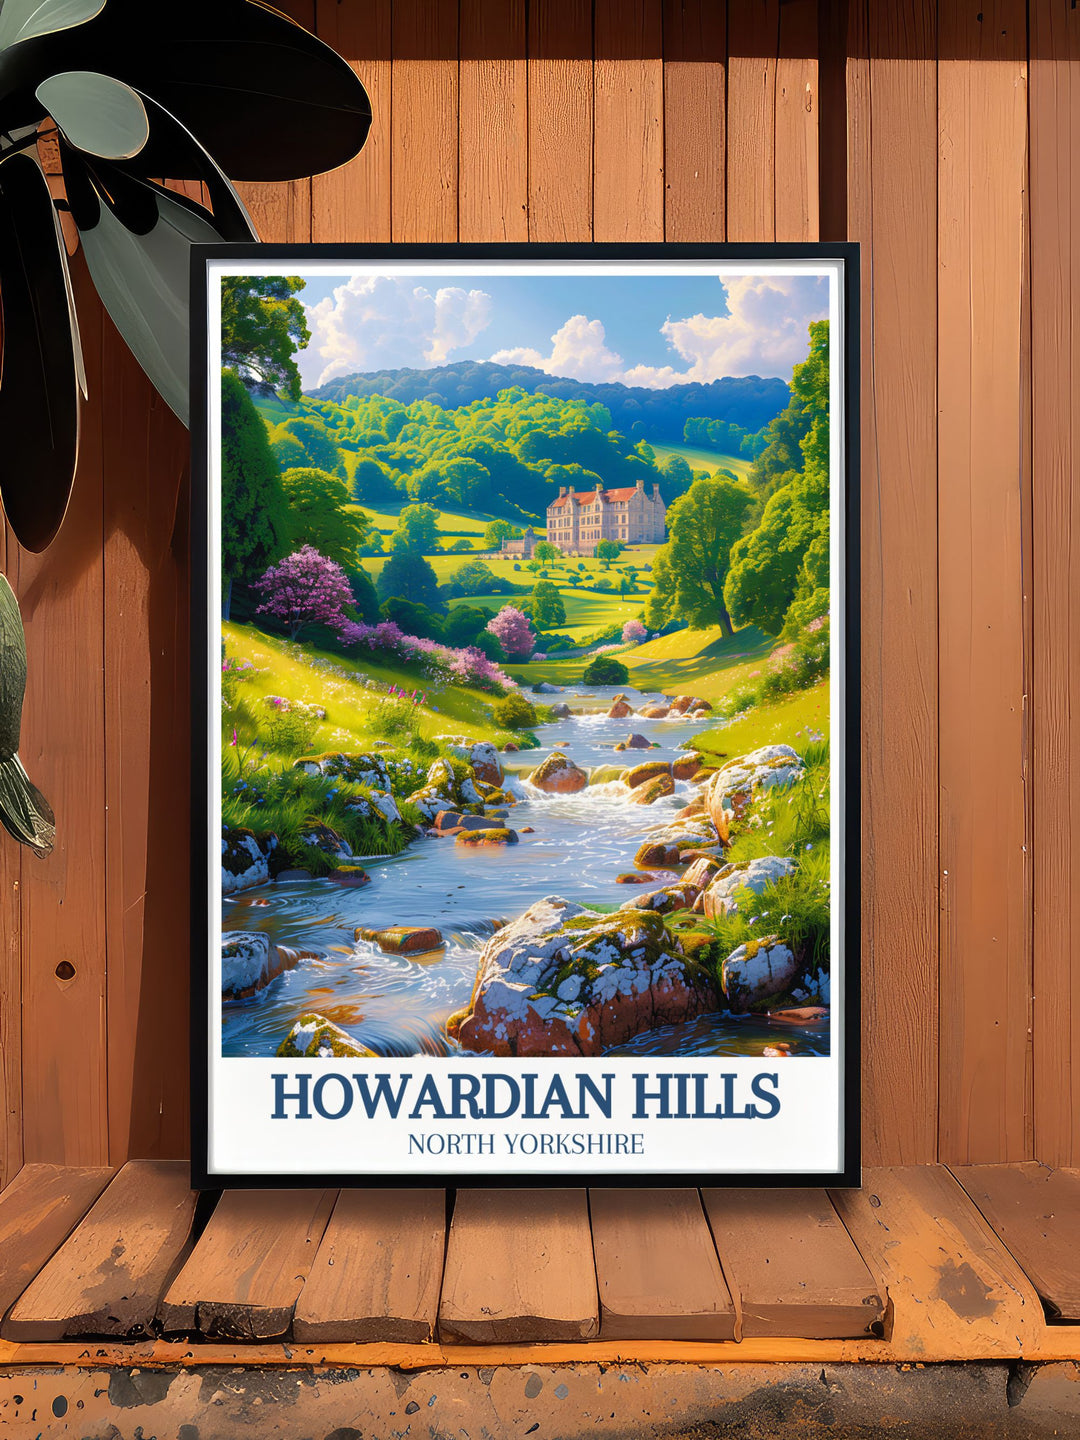 Canvas art of the River Derwent, illustrating its gentle flow through the Howardian Hills. This artwork brings the peaceful charm of Yorkshires riverside landscapes into your living space, ideal for nature enthusiasts and art lovers alike.